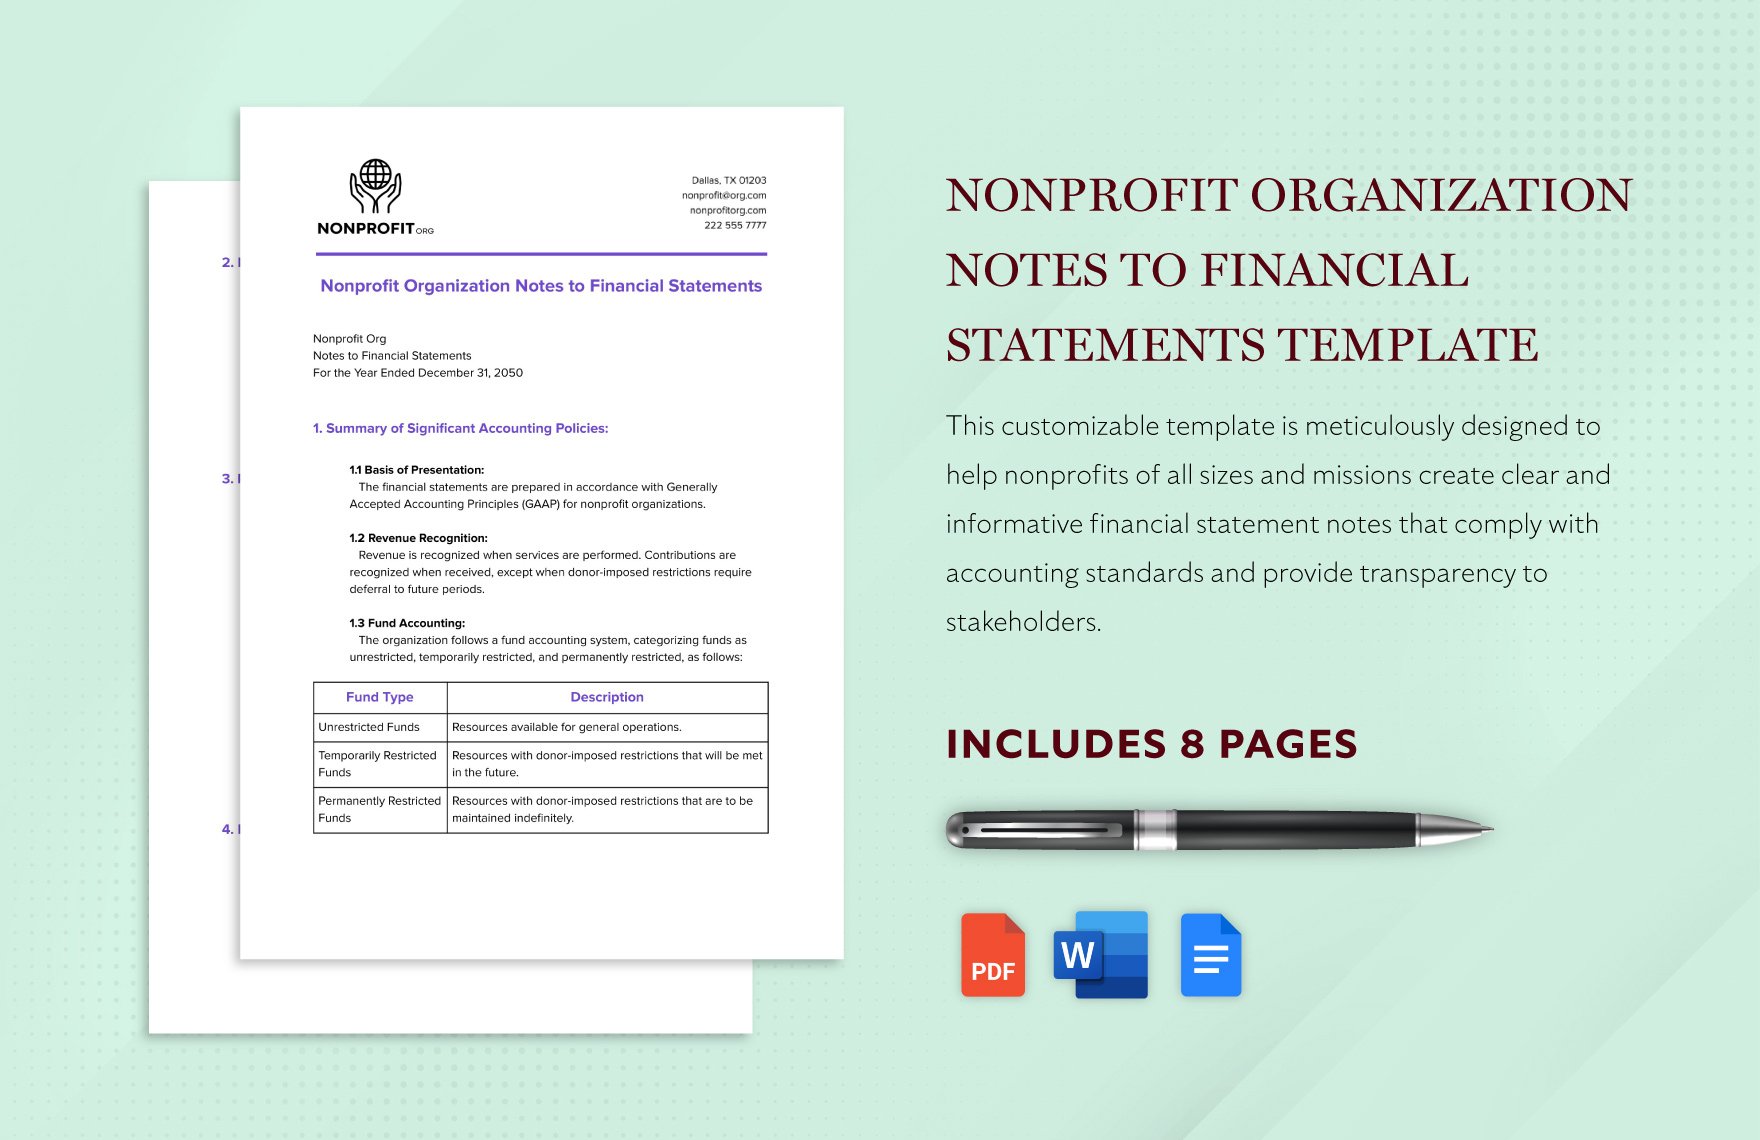 Nonprofit Organization Notes to Financial Statements Template in Word, Google Docs, PDF